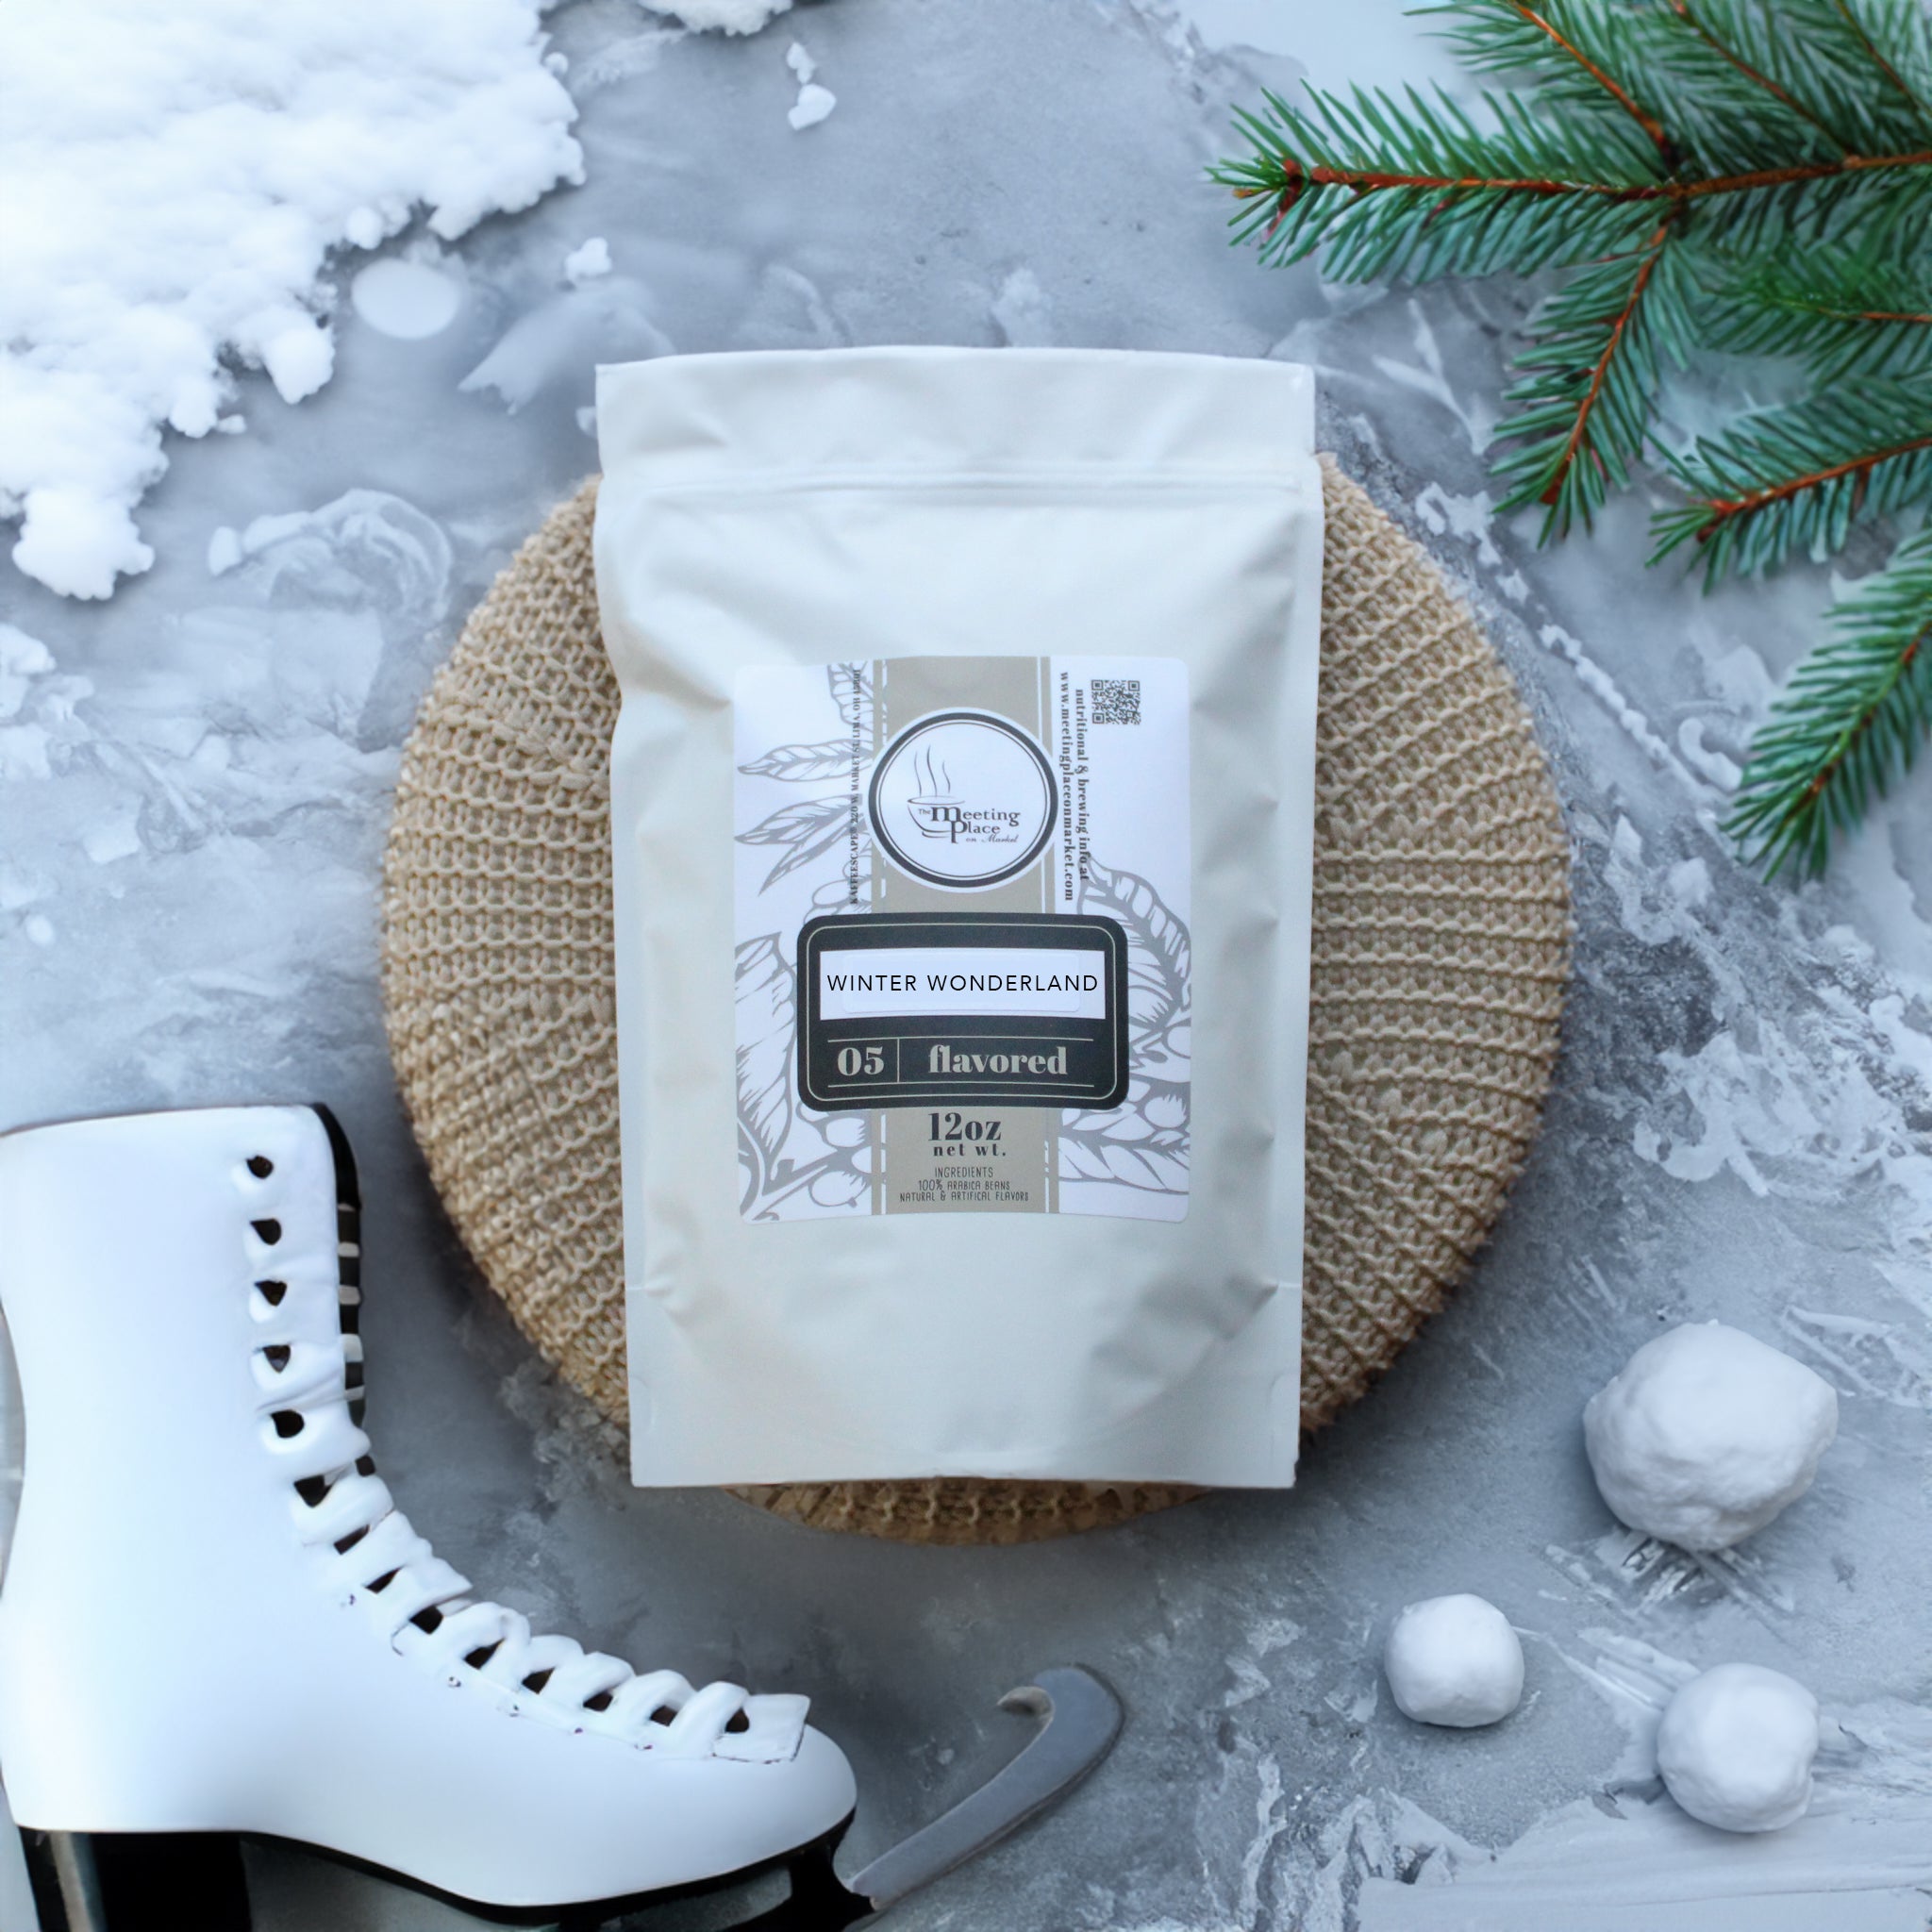 Winter Wonderland - Hints of Peppermint Chocolate flavored Coffee Beans or Ground Coffee {Seasonal} Gourmet Coffee - The Meeting Place on Market